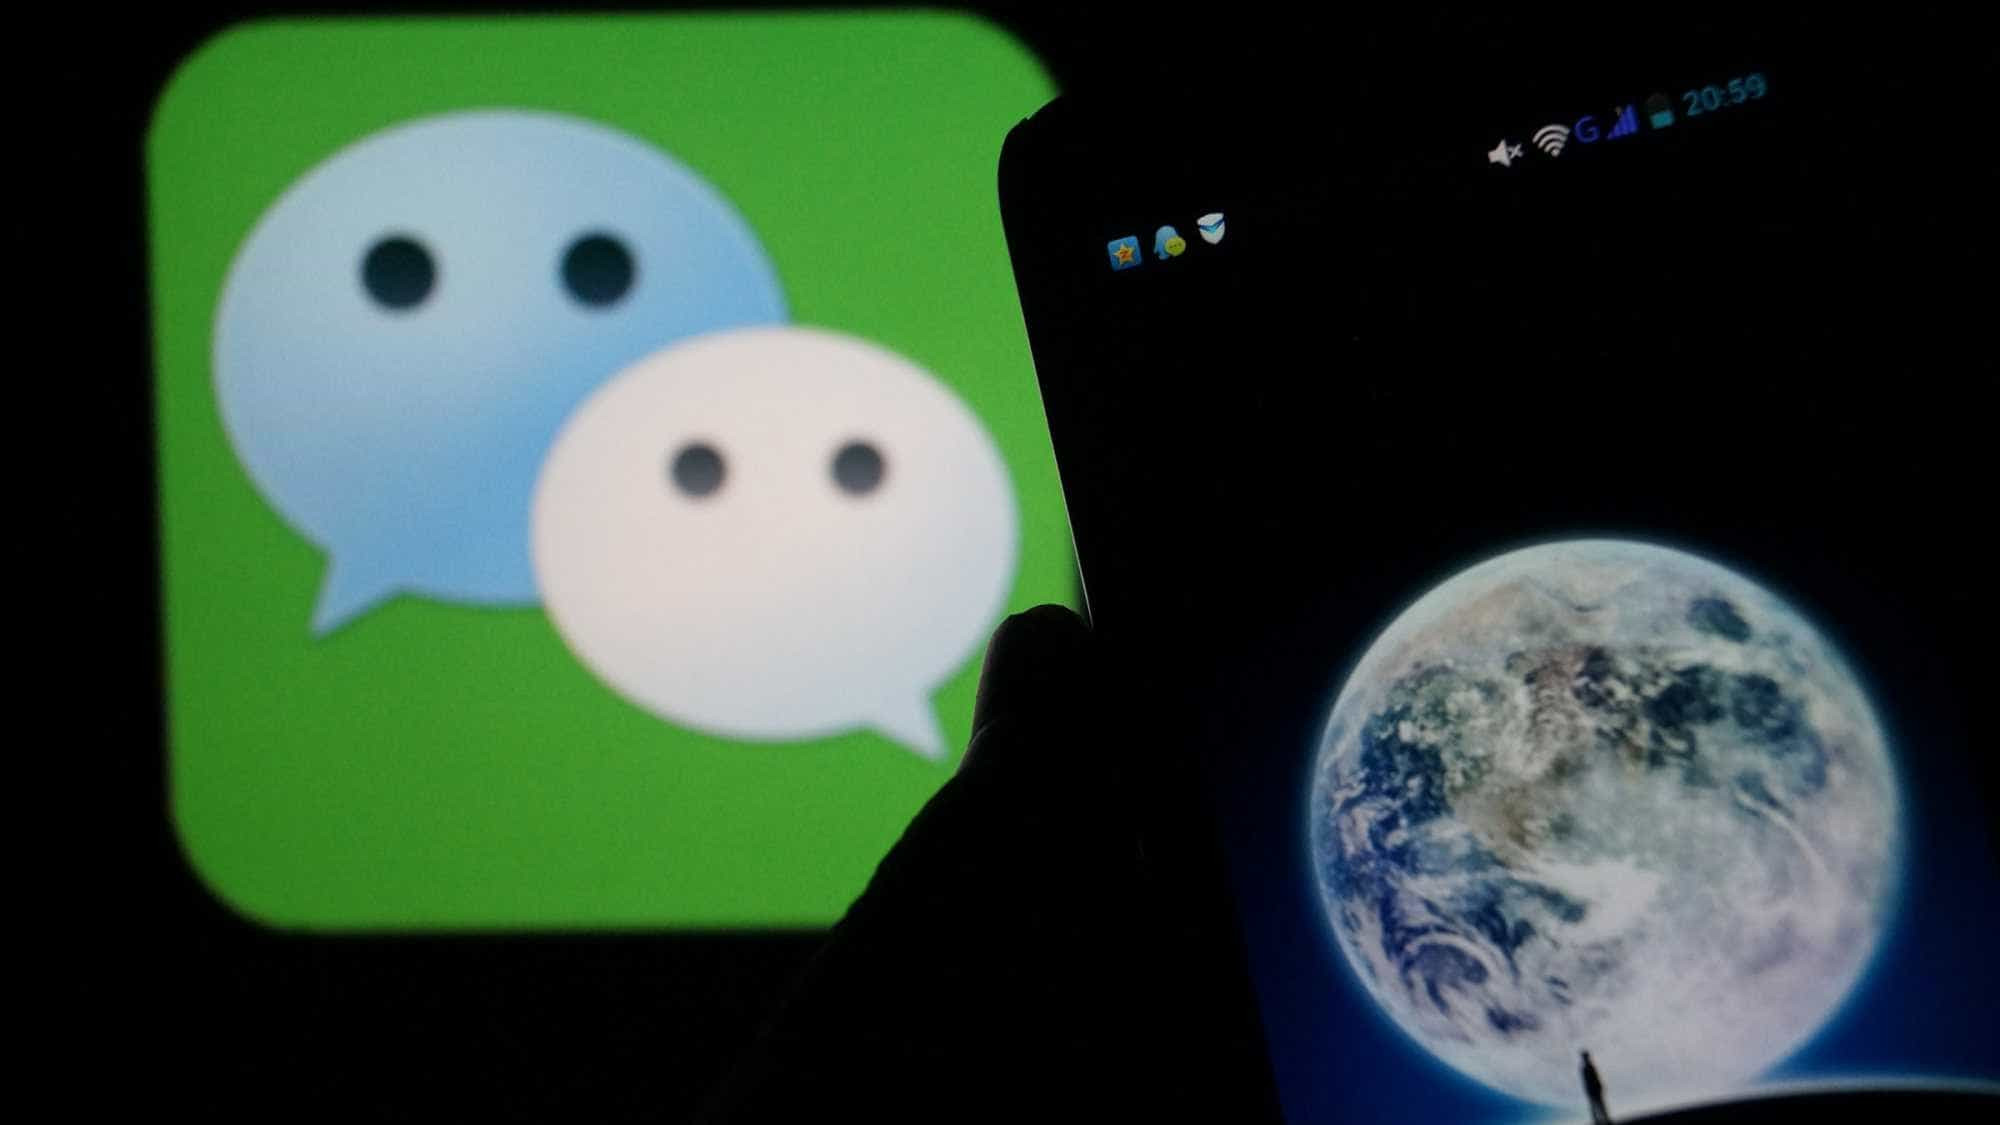  Are you an Android? Here are the best messaging applications 